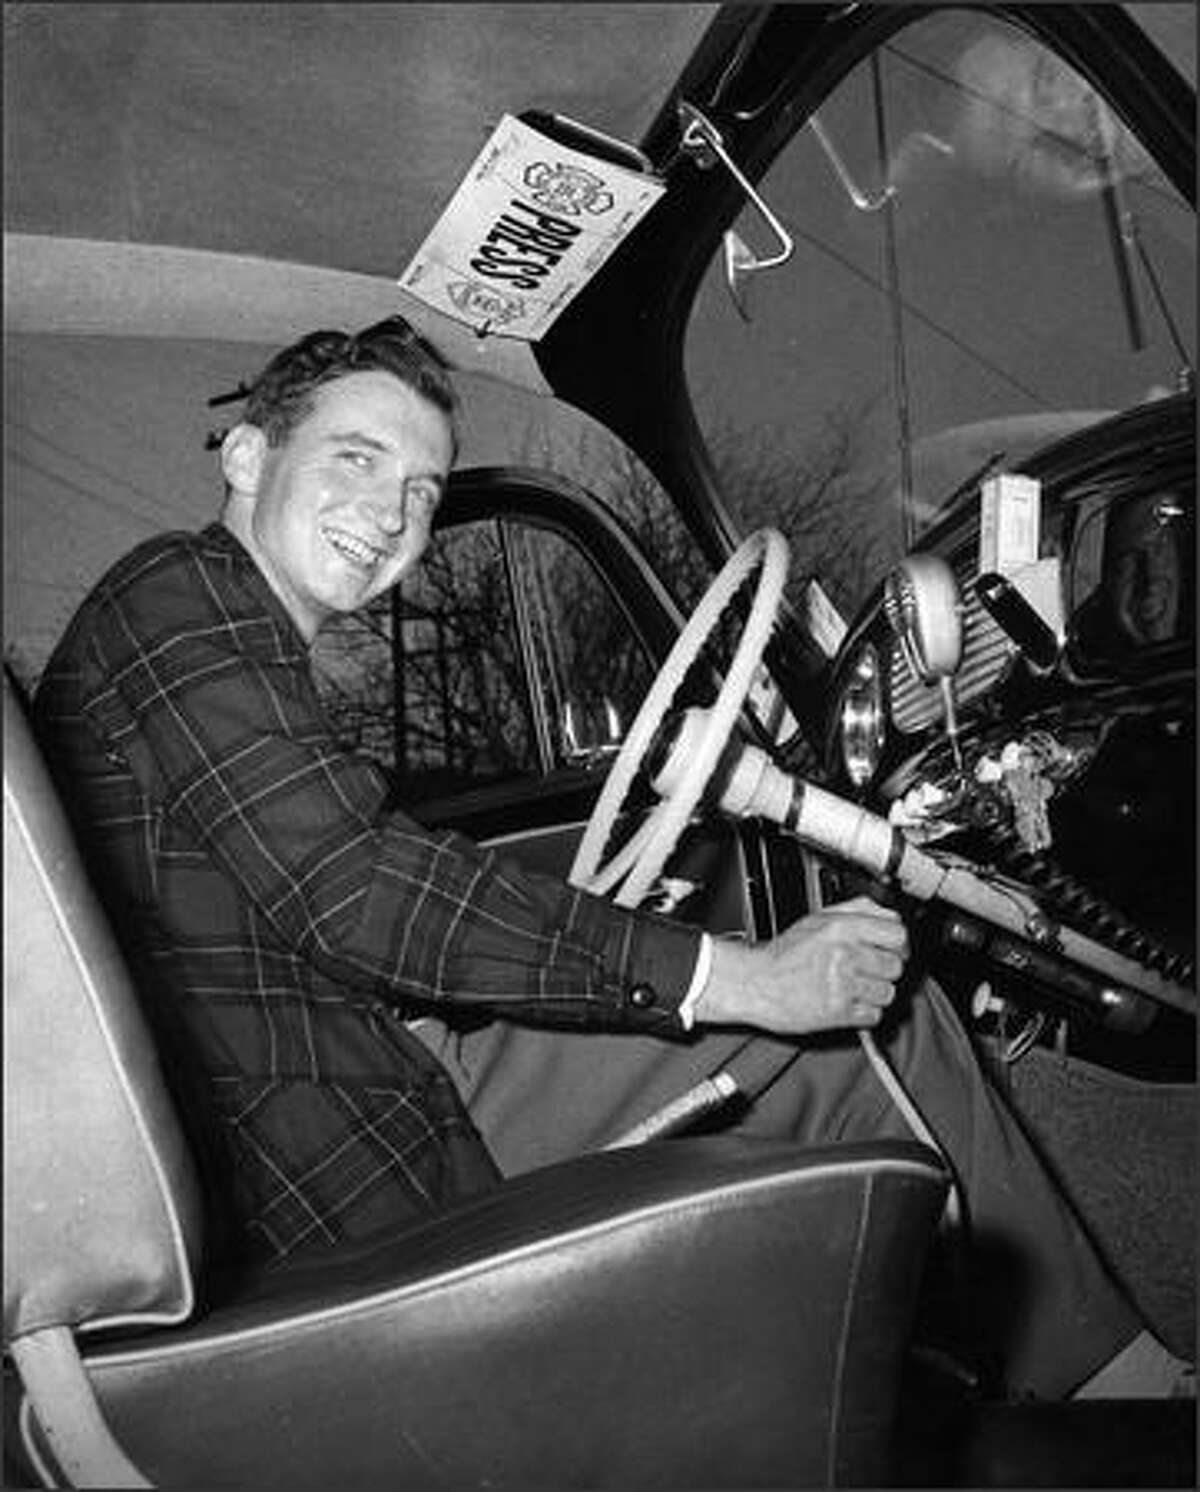 Phil H. Webber sits in his Volkswagen in this 1958 photo.